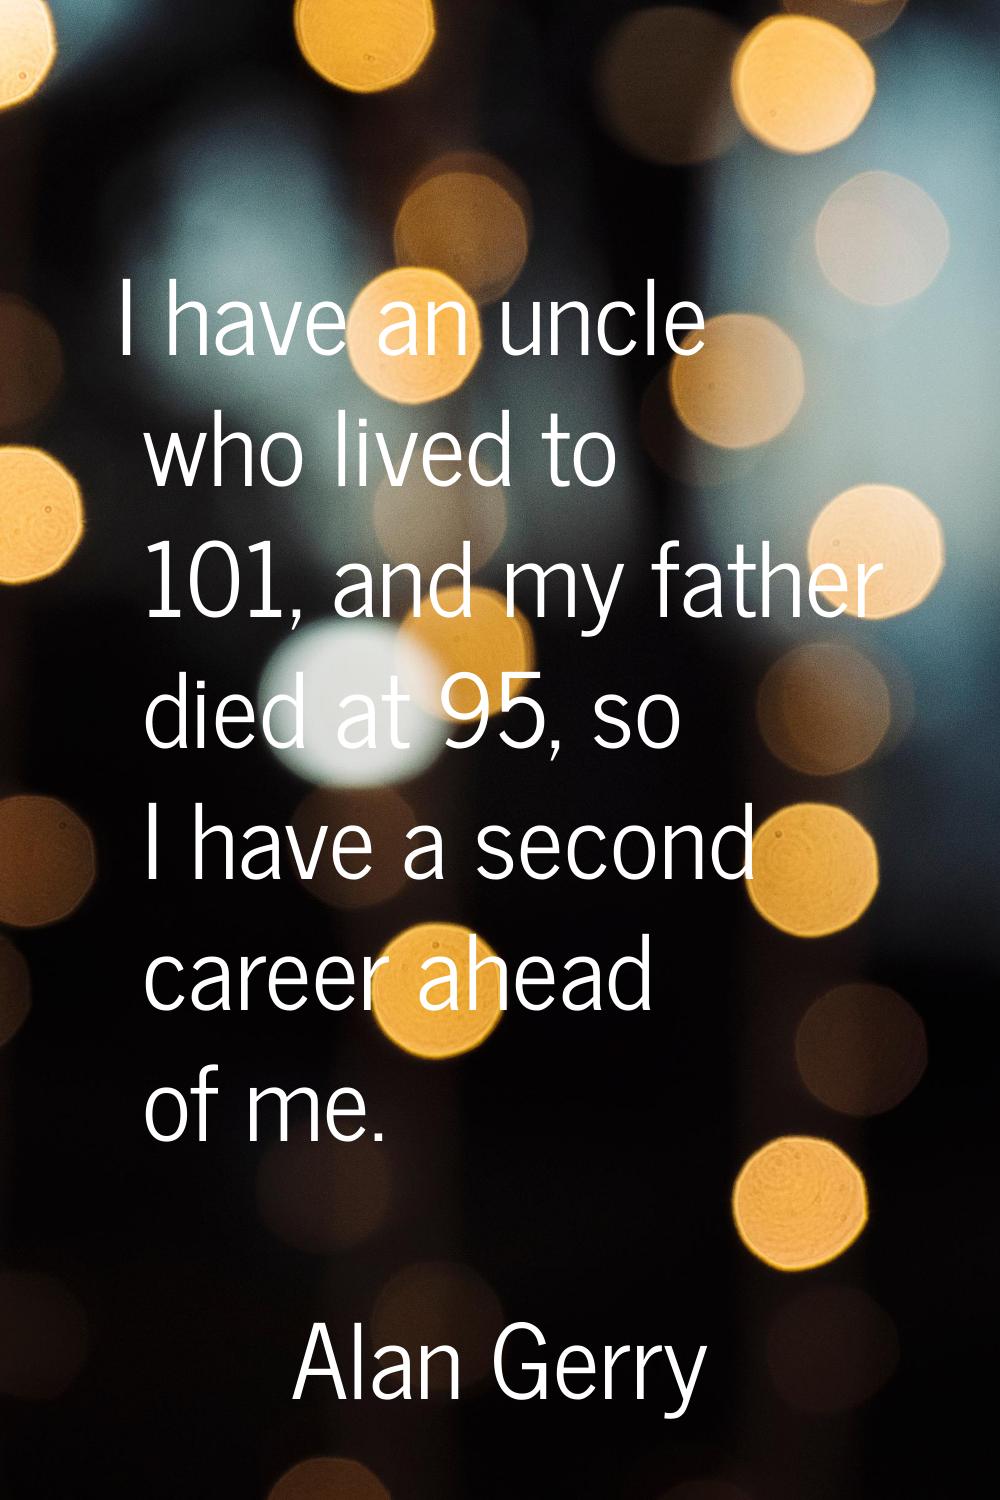 I have an uncle who lived to 101, and my father died at 95, so I have a second career ahead of me.